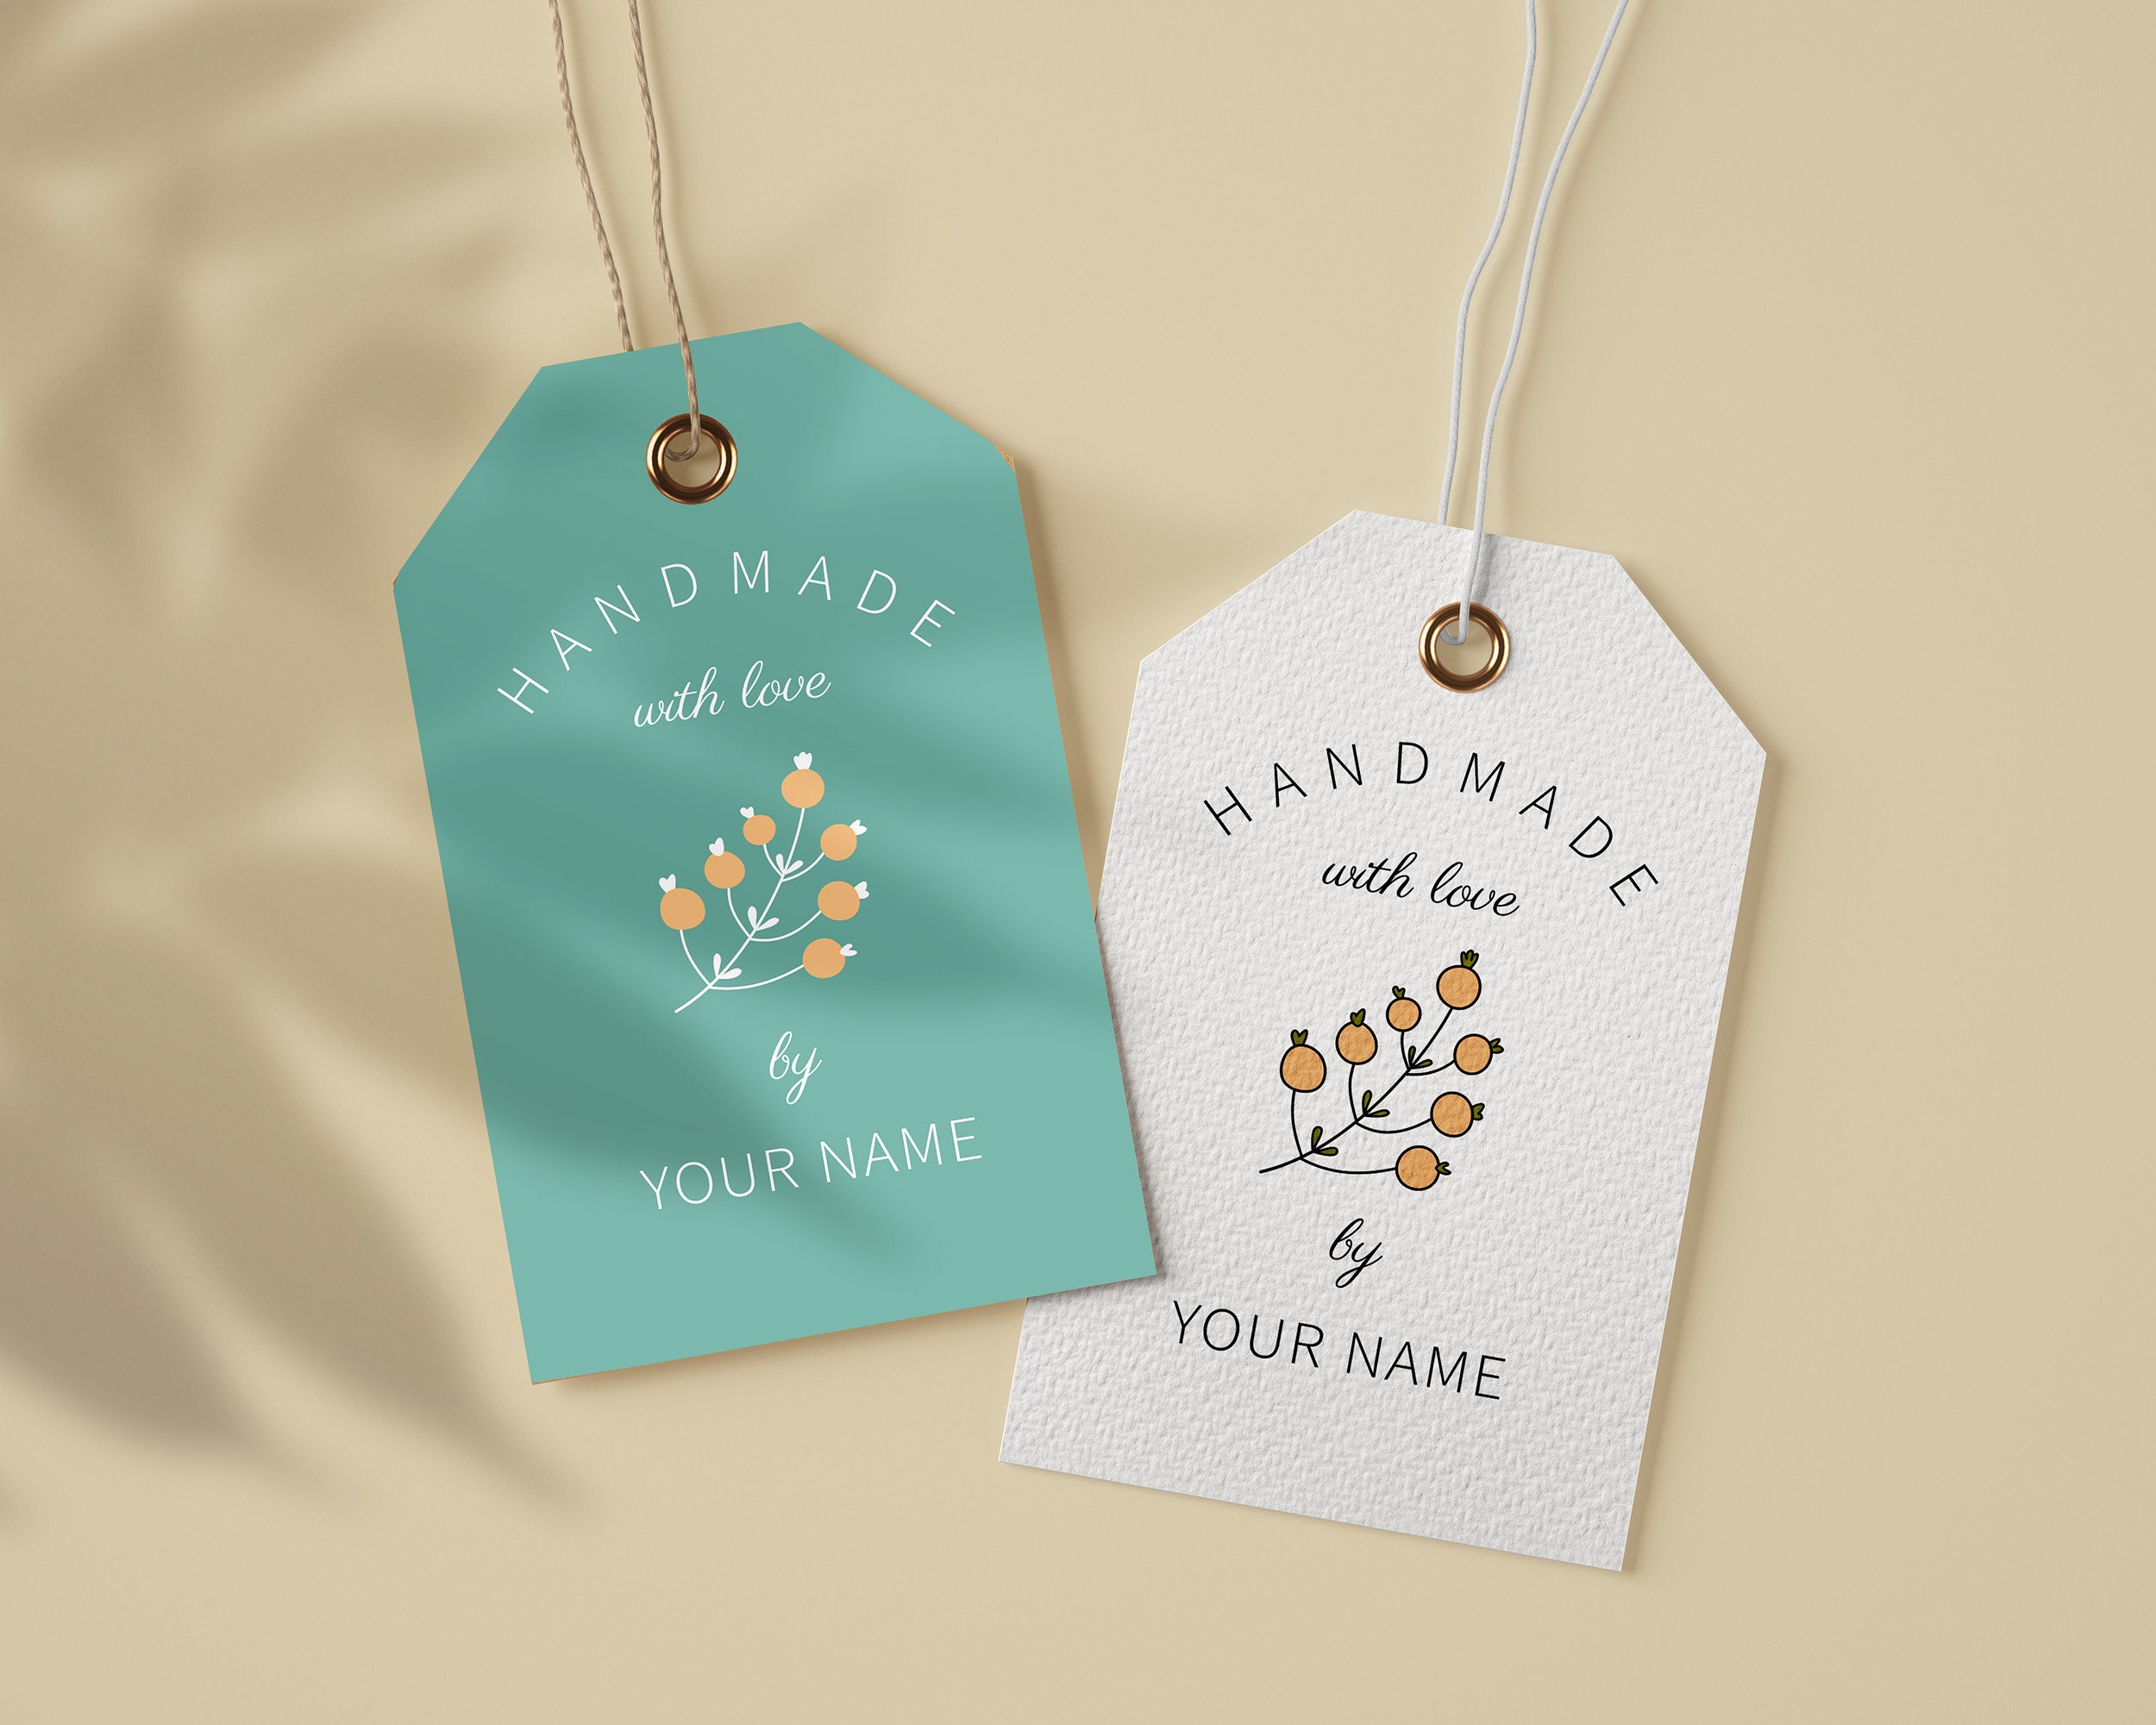 Handmade with love tags - Business hang tags